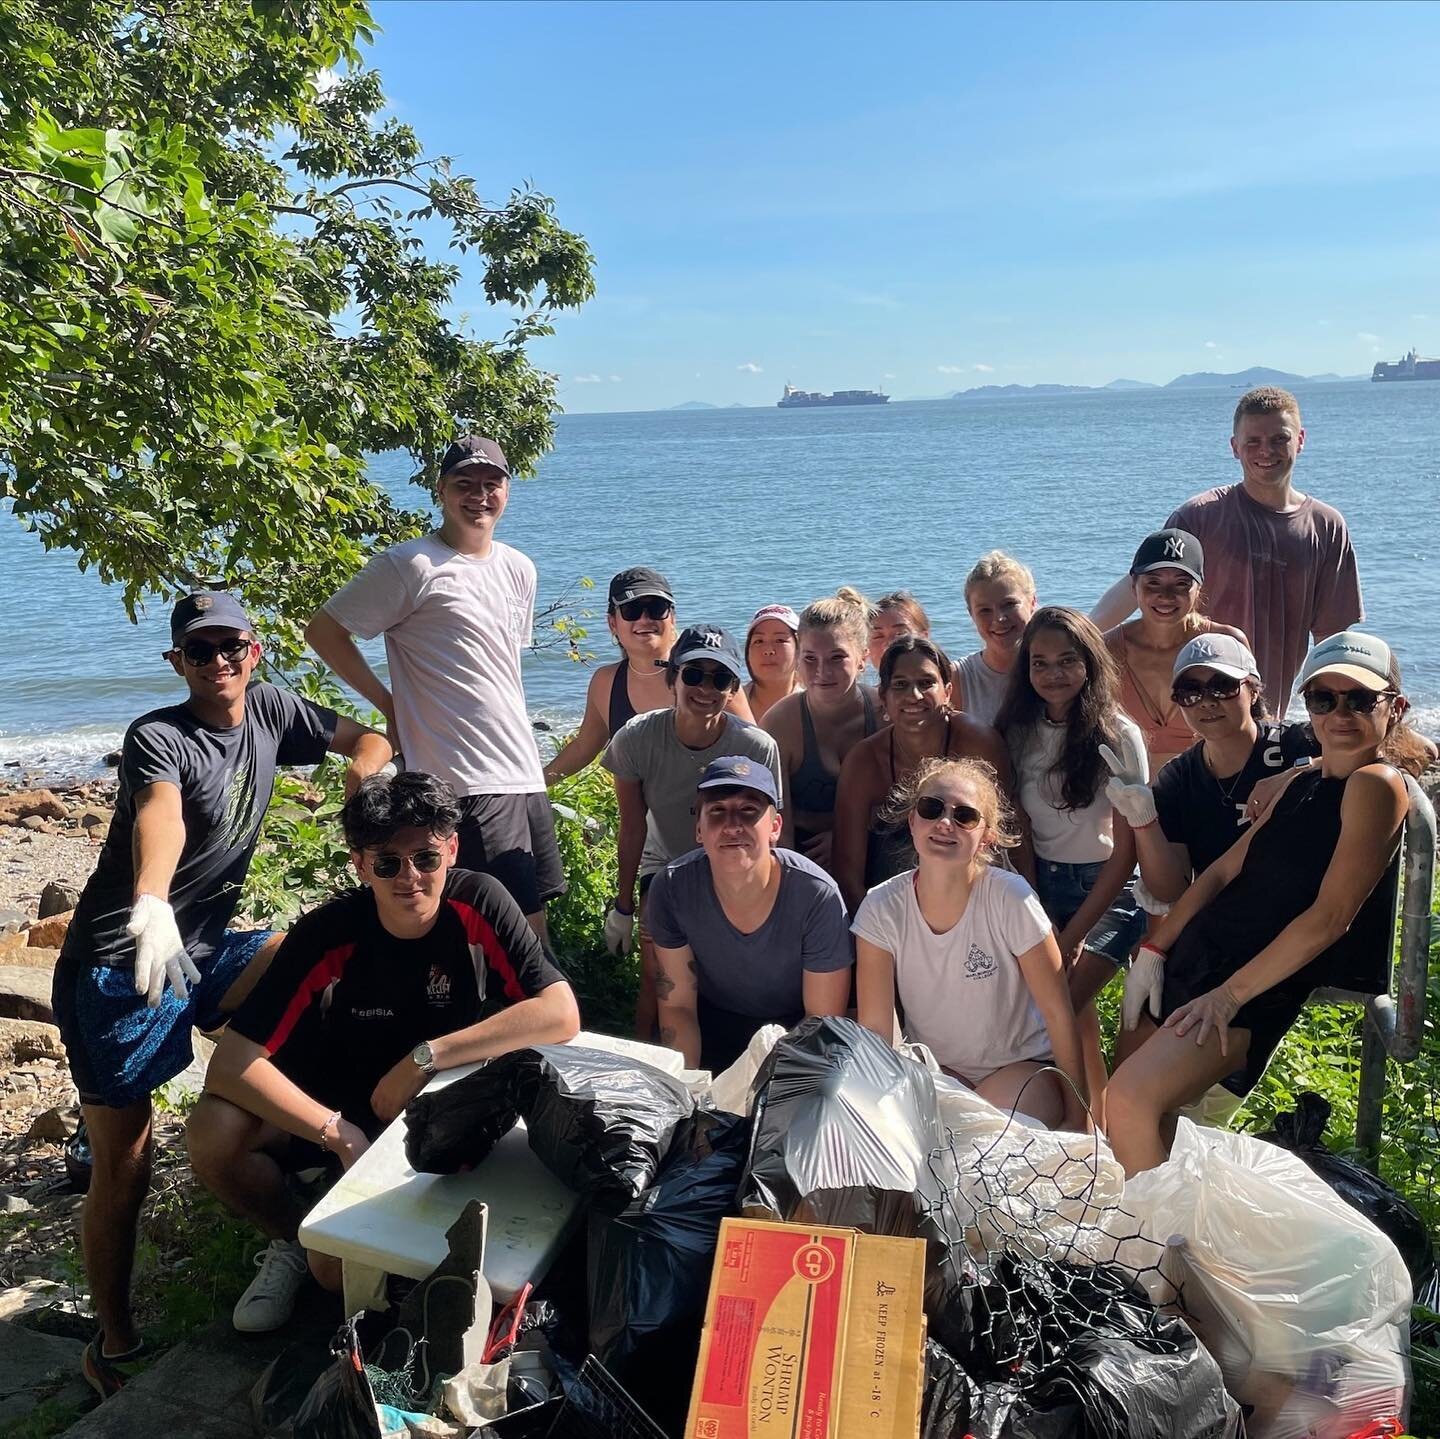 A great effort by TEC HQ with their first official beach clean up. ⠀
⠀
Braving the summer sun, Team Members spent the afternoon collecting non-biodegradable materials such as polystyrene, plastics, aluminium cans and more that had washed up onshore. 